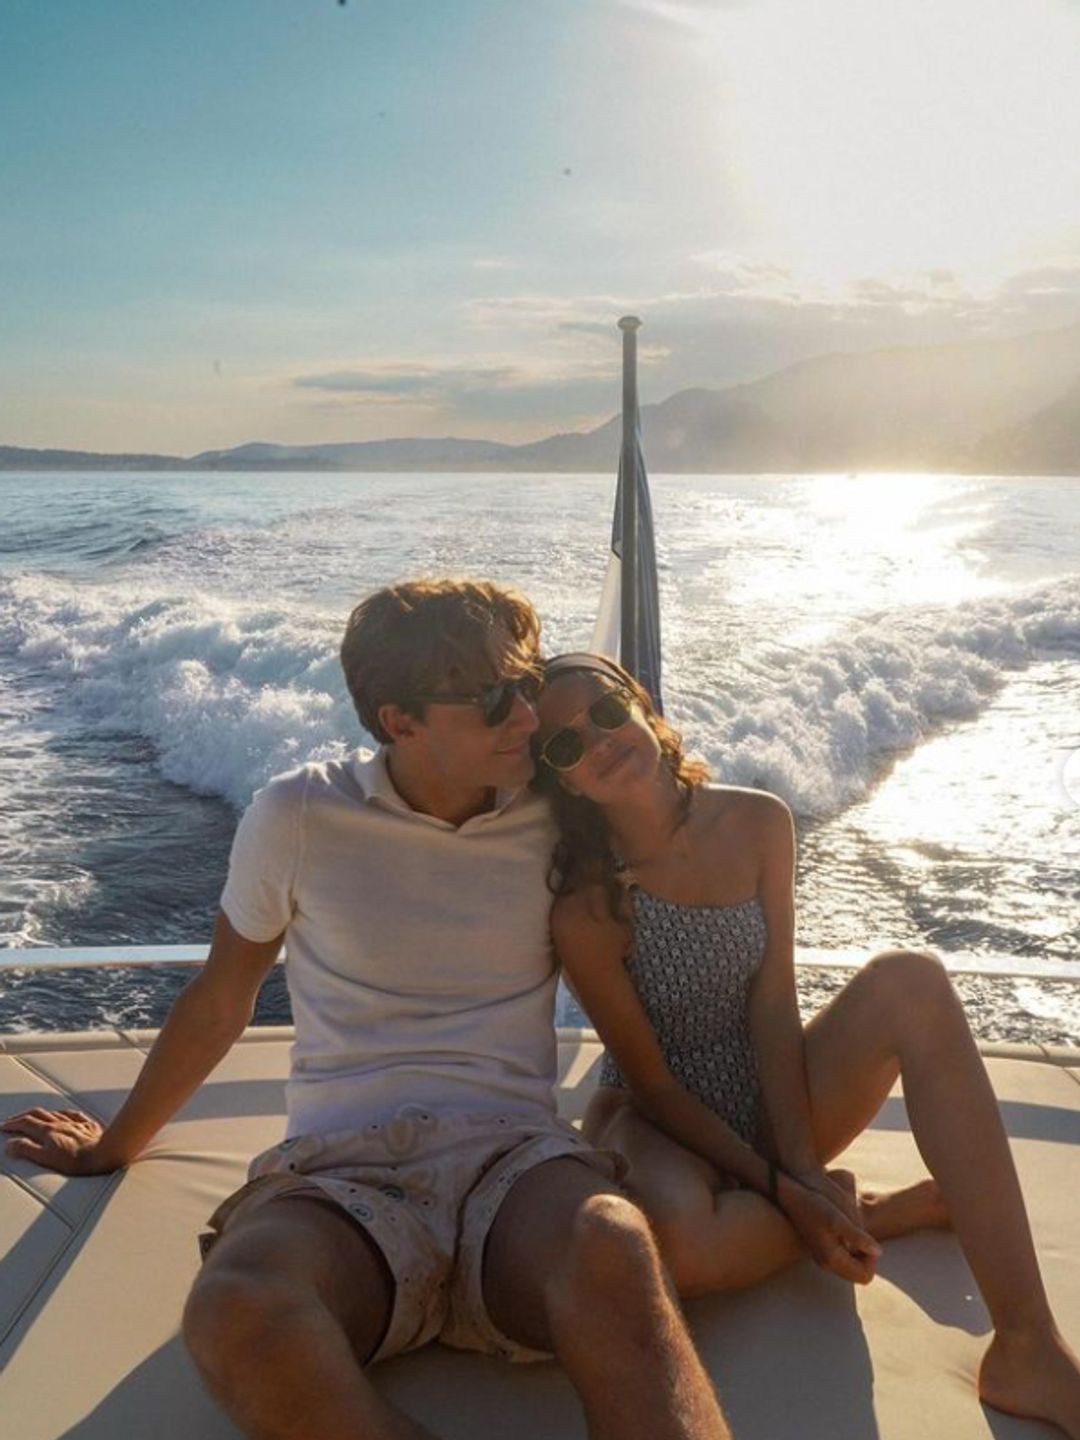 George Russell and Carmen Montero Mundt snuggled together on a boat